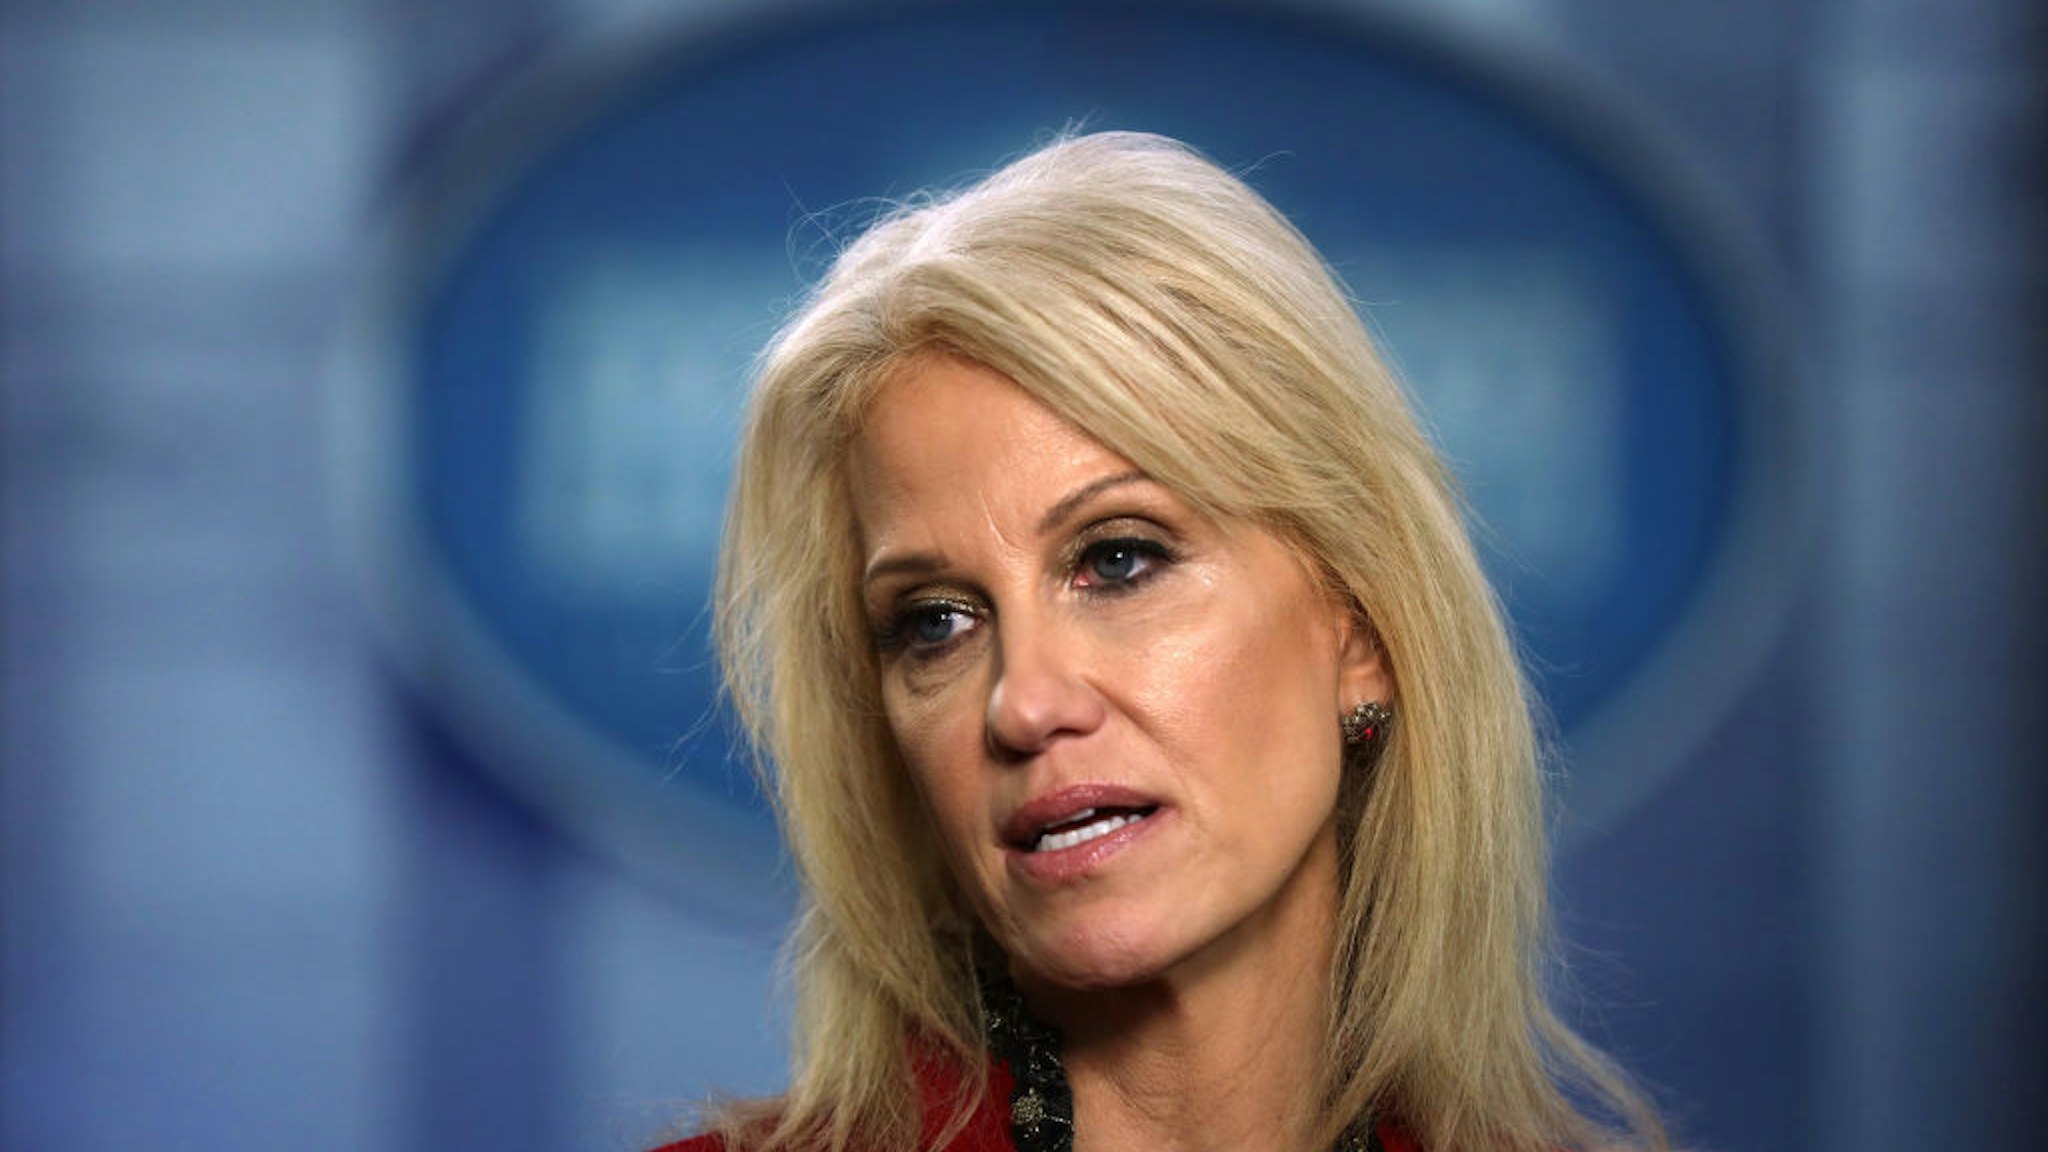 White House Senior Counselor Kellyanne Conway speaks to members of the media at the James Brady Press Briefing Room of the White House January 10, 2020 in Washington, DC.